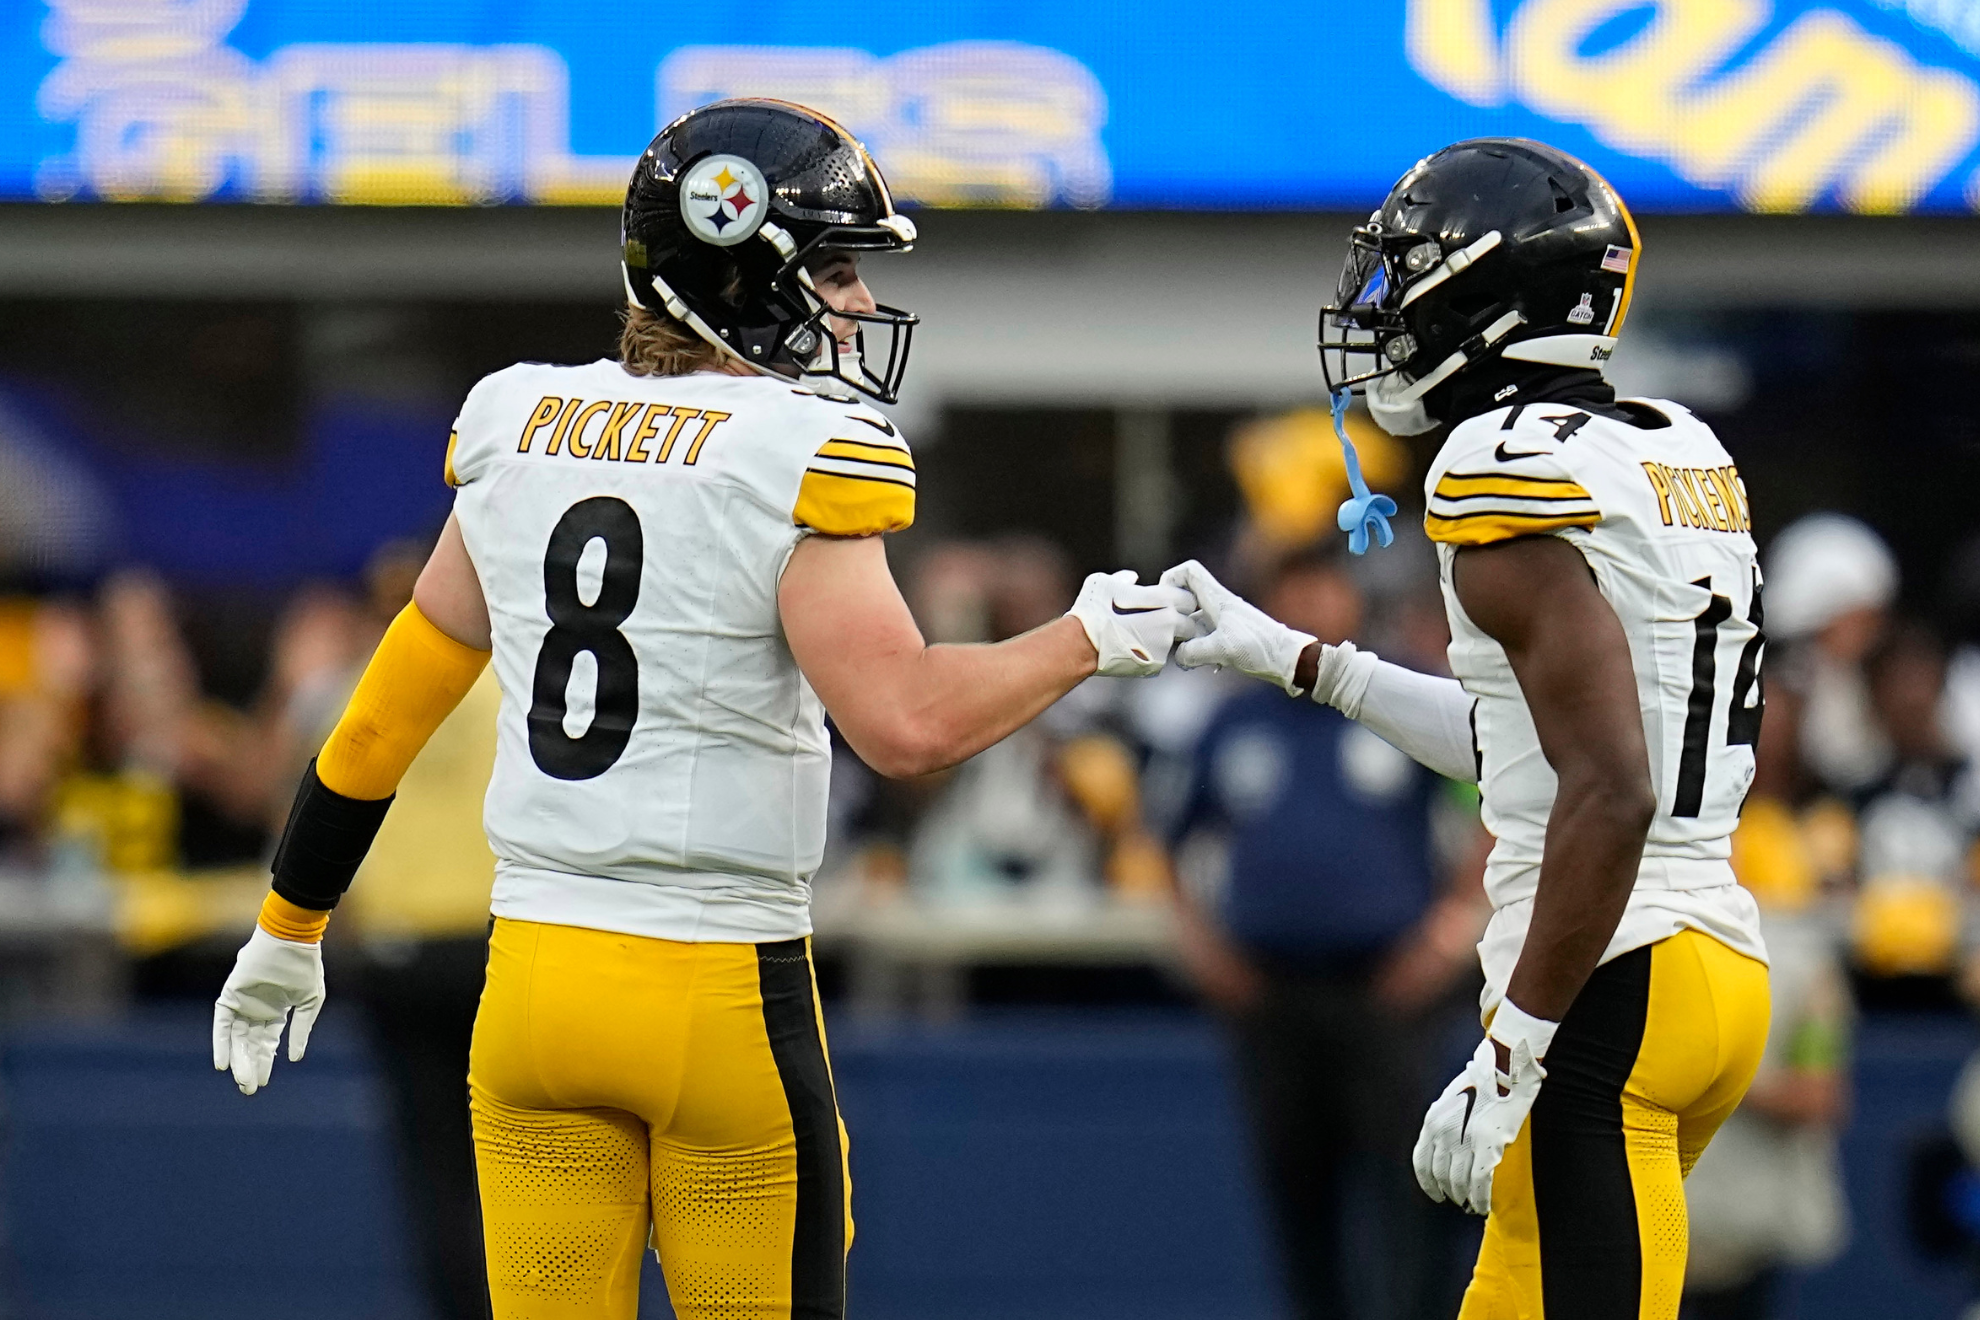 Pickett and Pickens: Pittsburgh's dynamic duo.